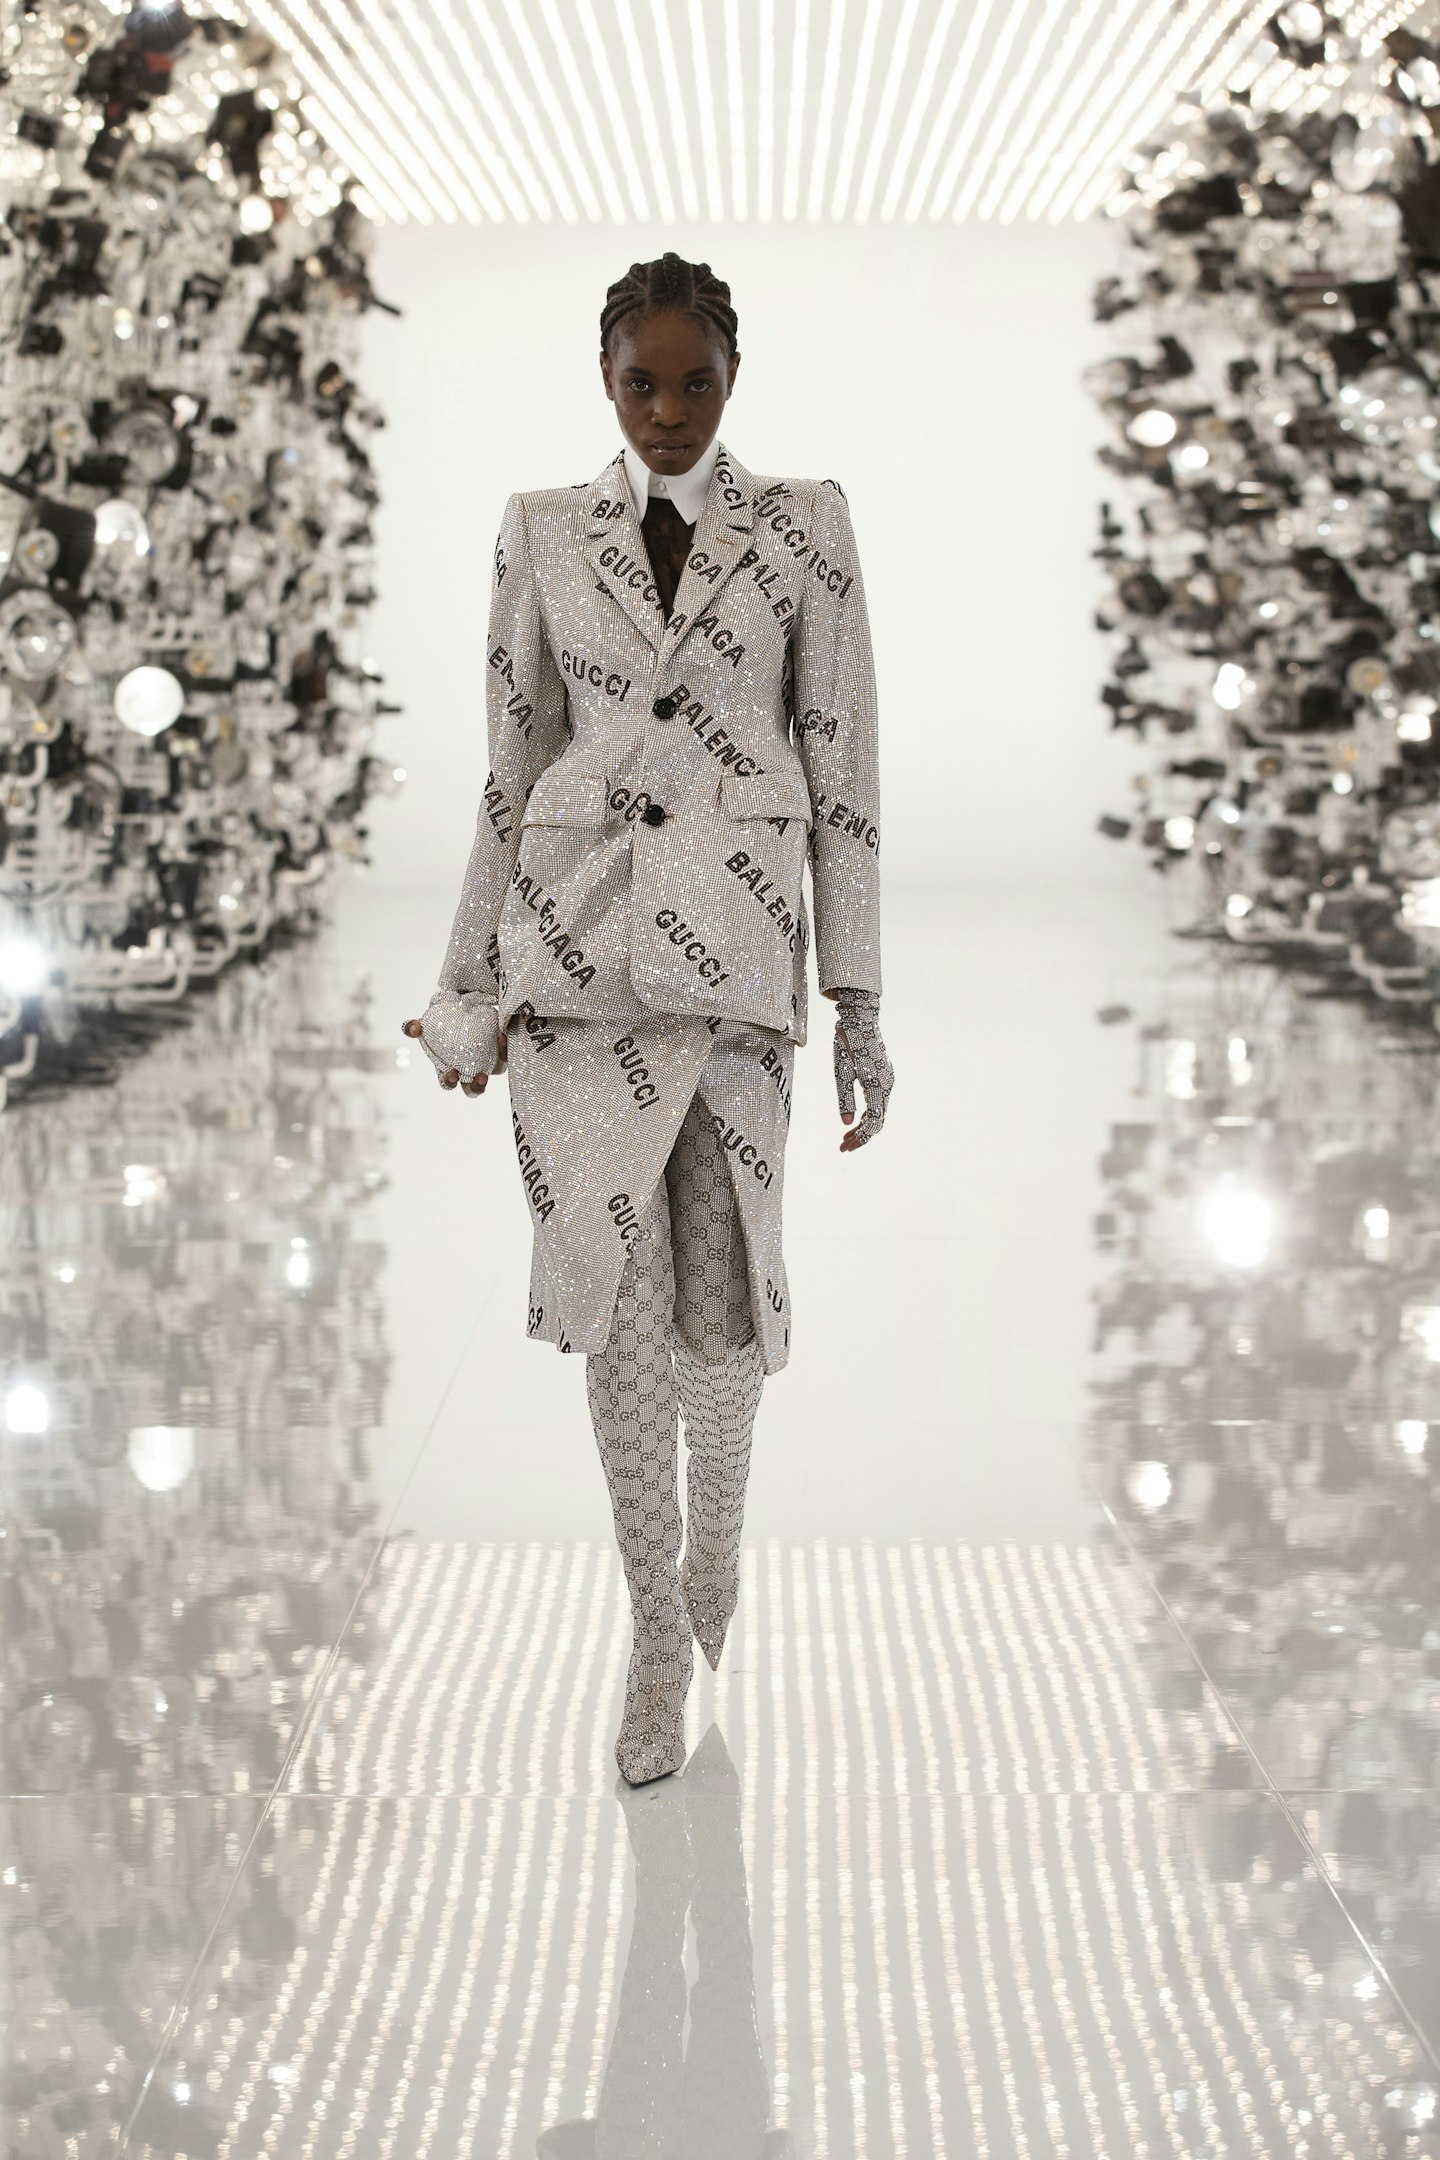 A model wearing a spangled silver skirt suit at Gucci 